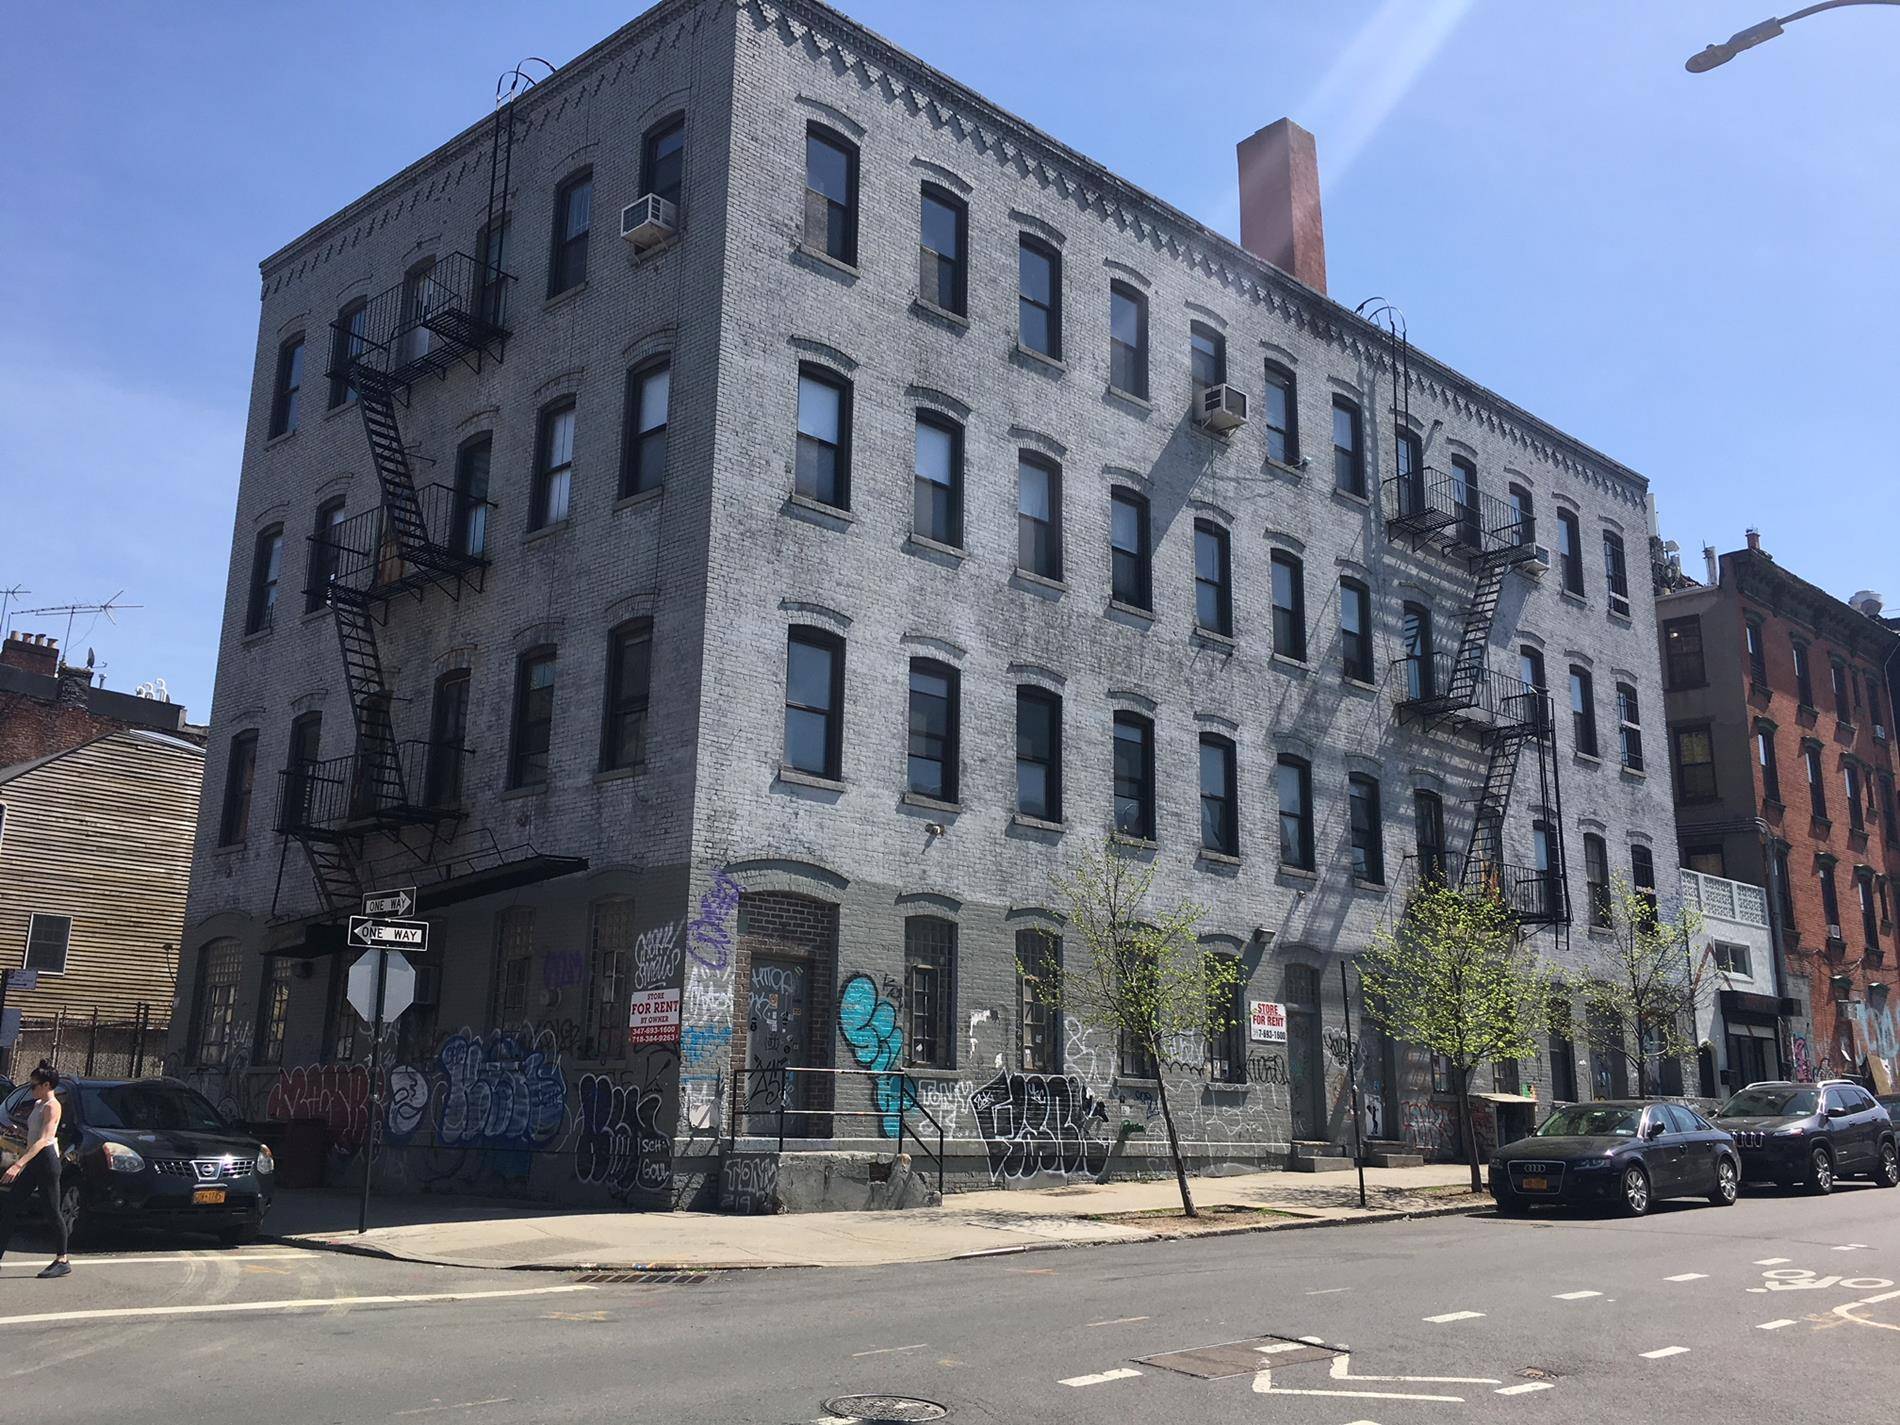 The subject property is a mixed use loft building located in Northside Williamsburg, Brooklyn.